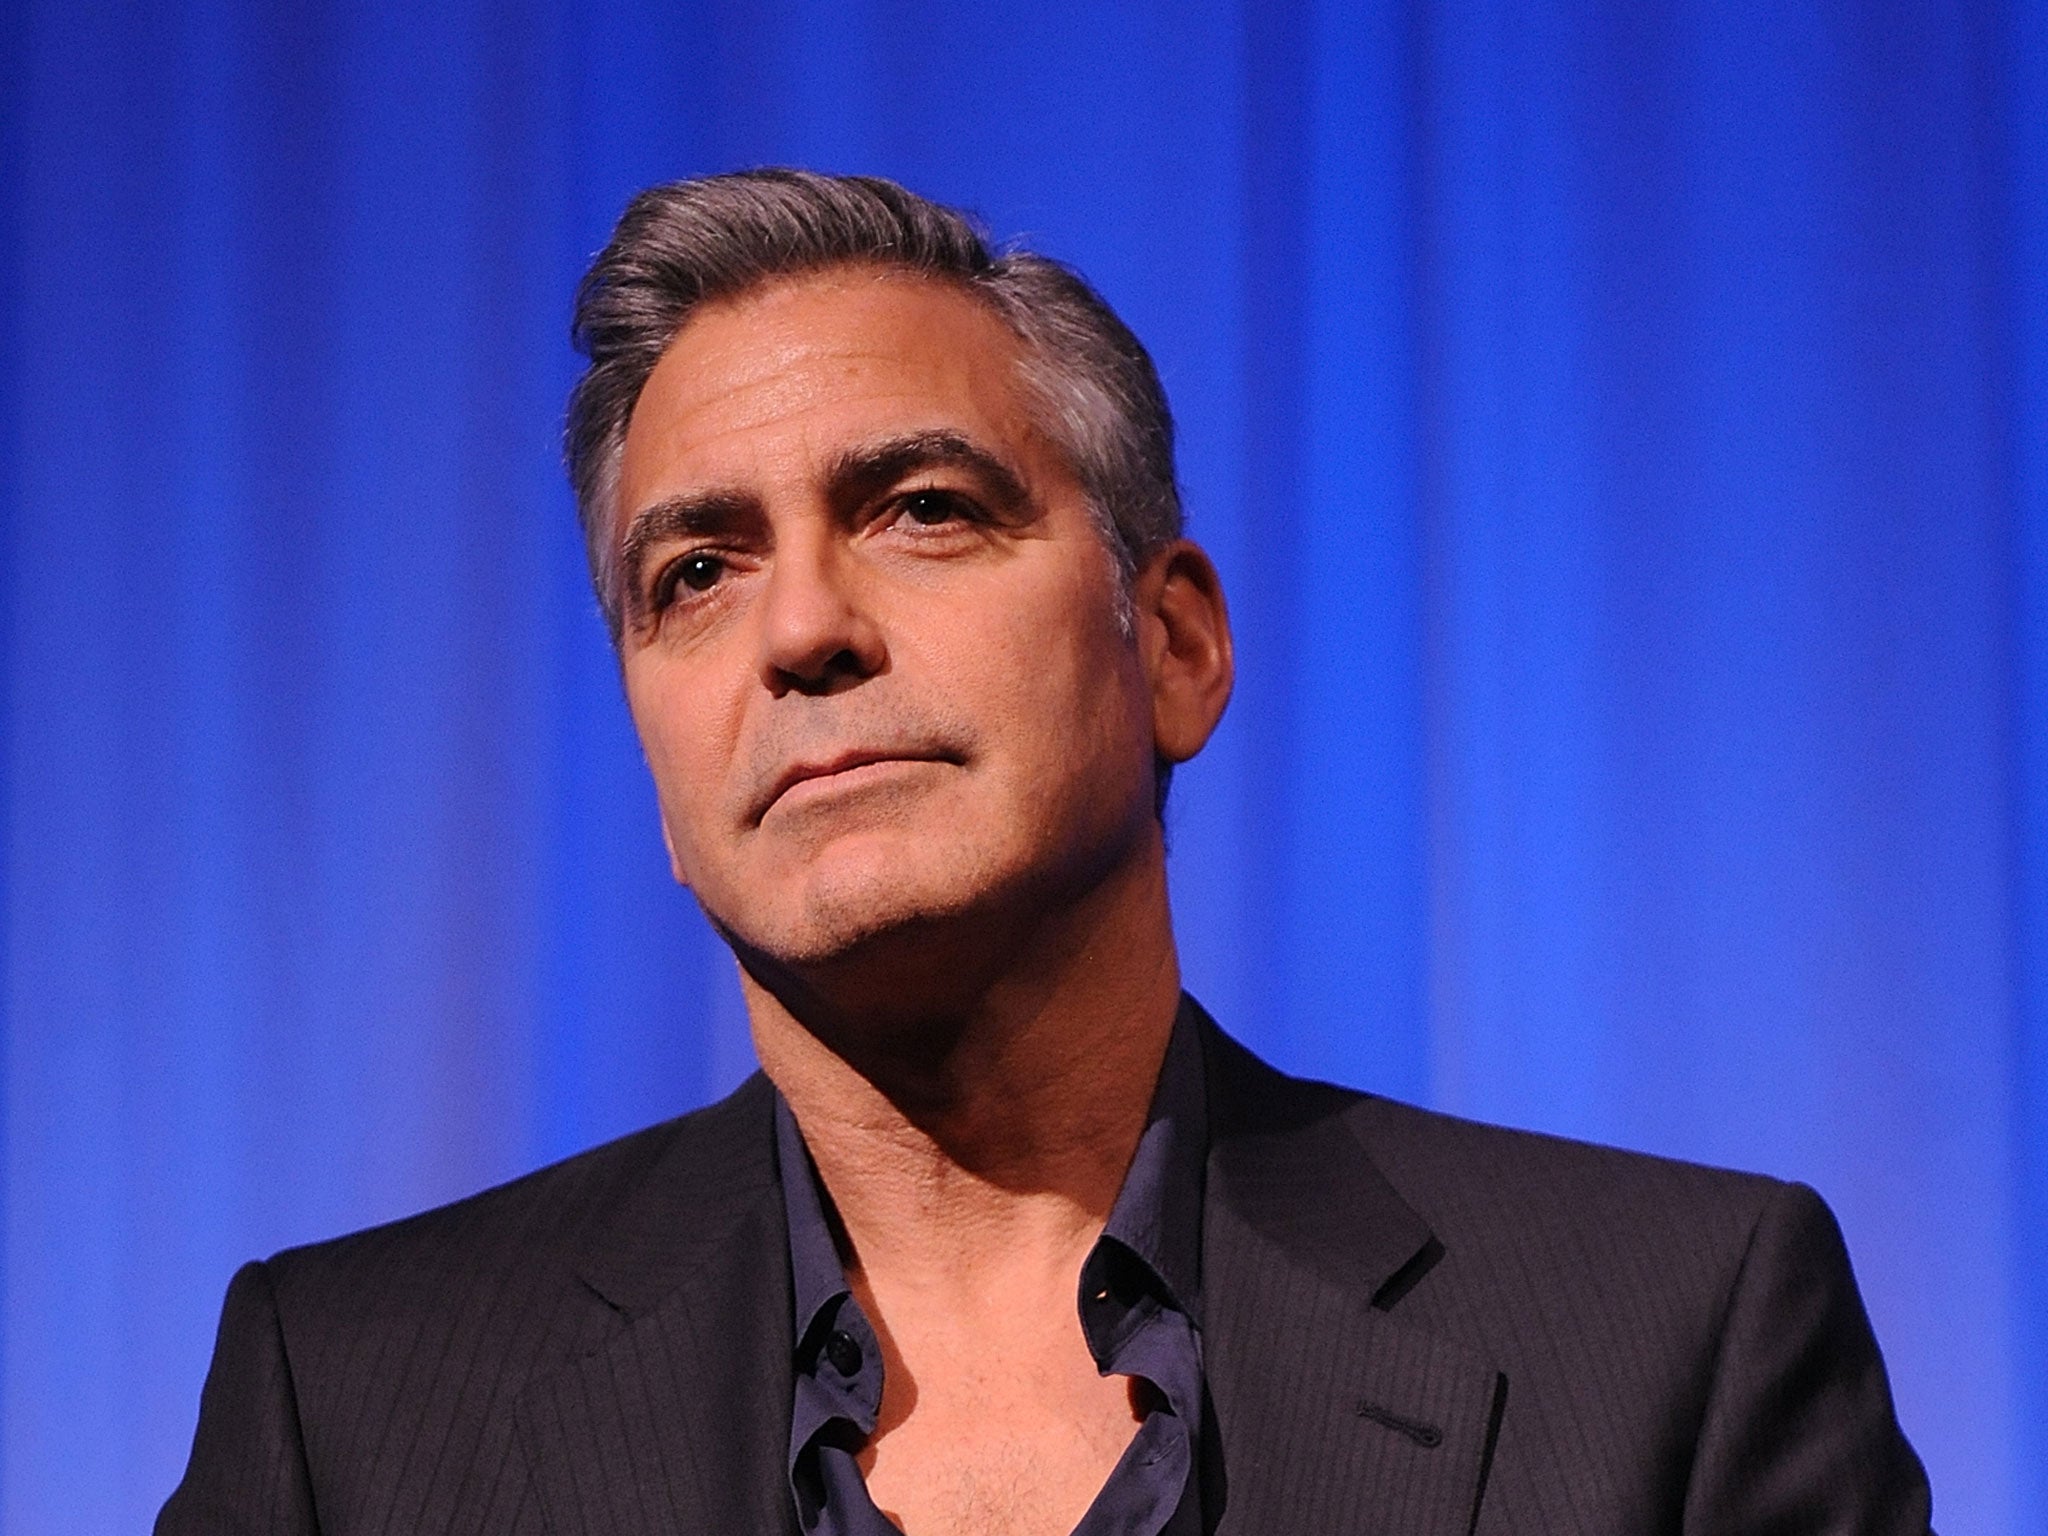 Production on George Clooney's phone hacking film is expected to begin in 2015